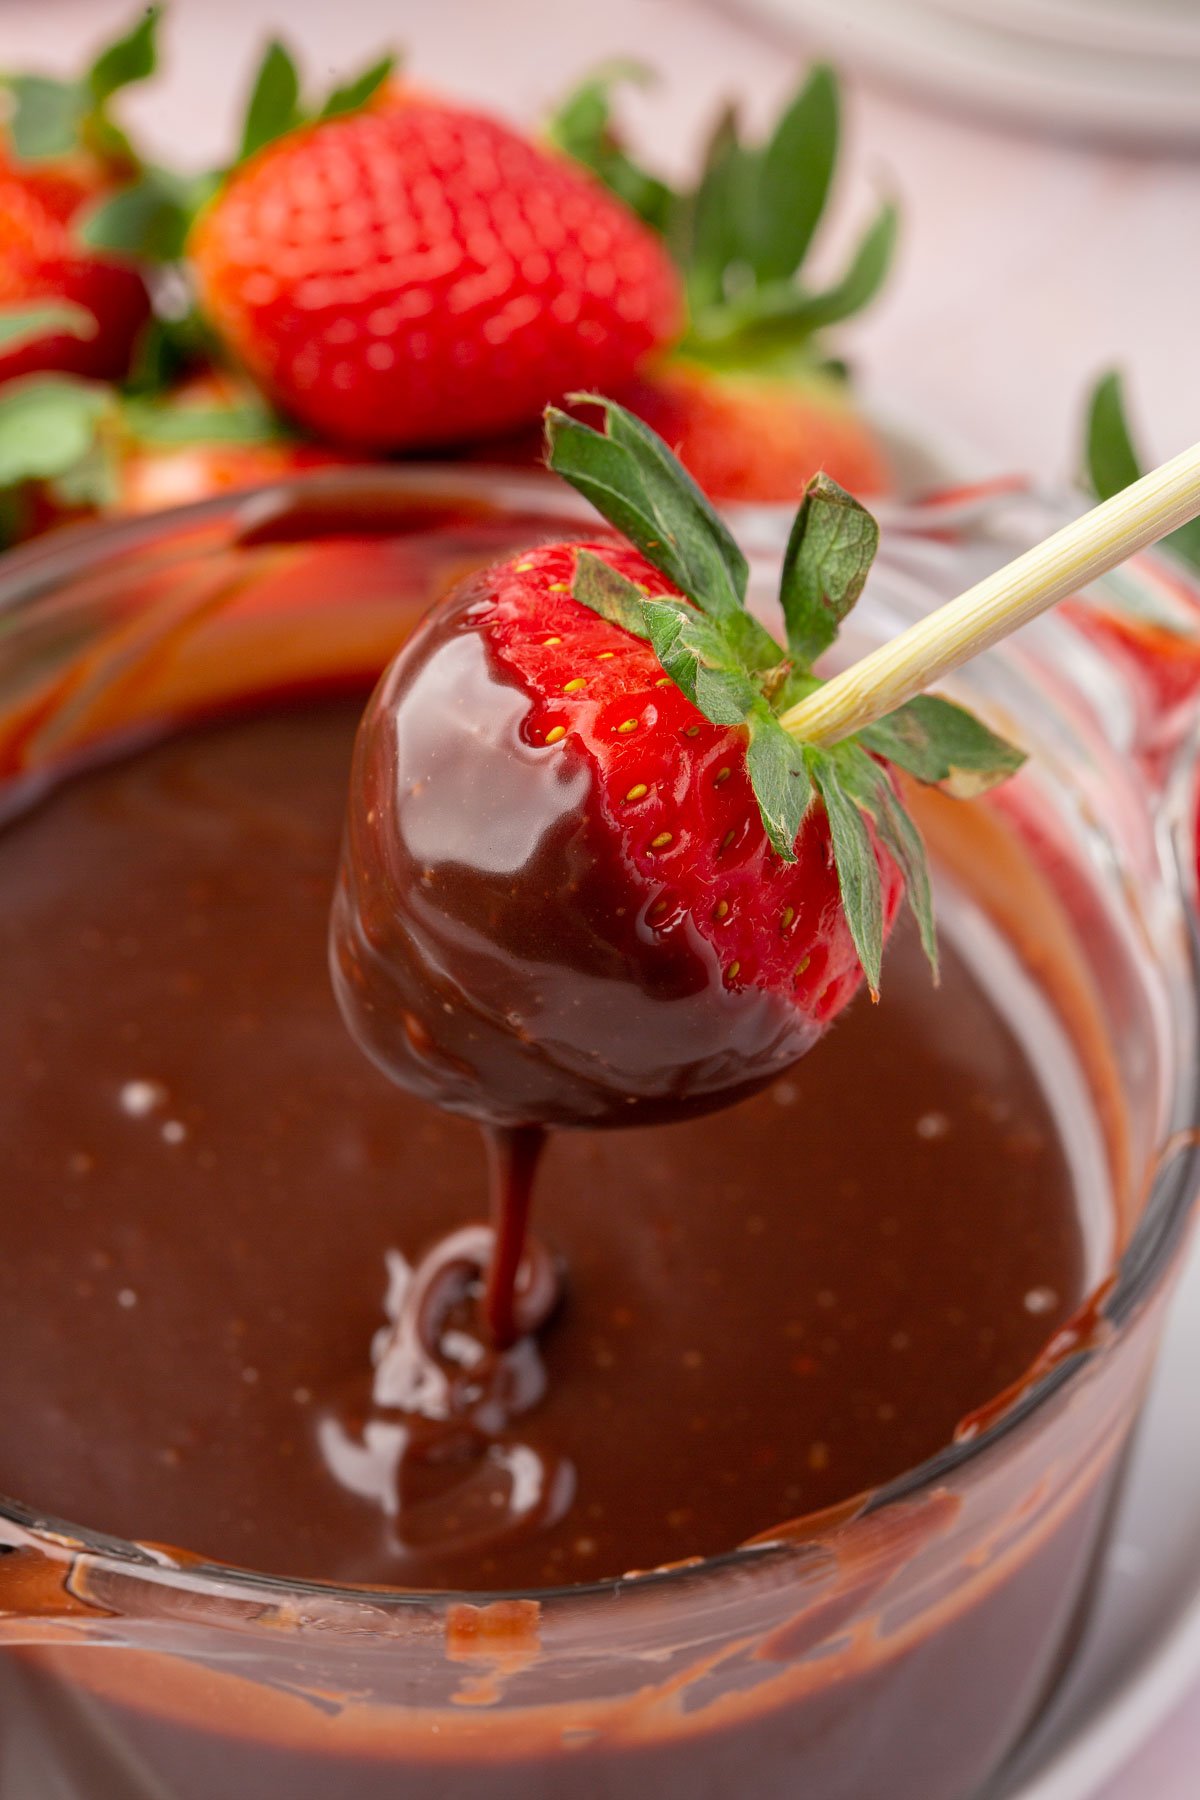 A strawberry on a wooden skewer that has been dipped into Nutella ganache over a bowl of more ganache.